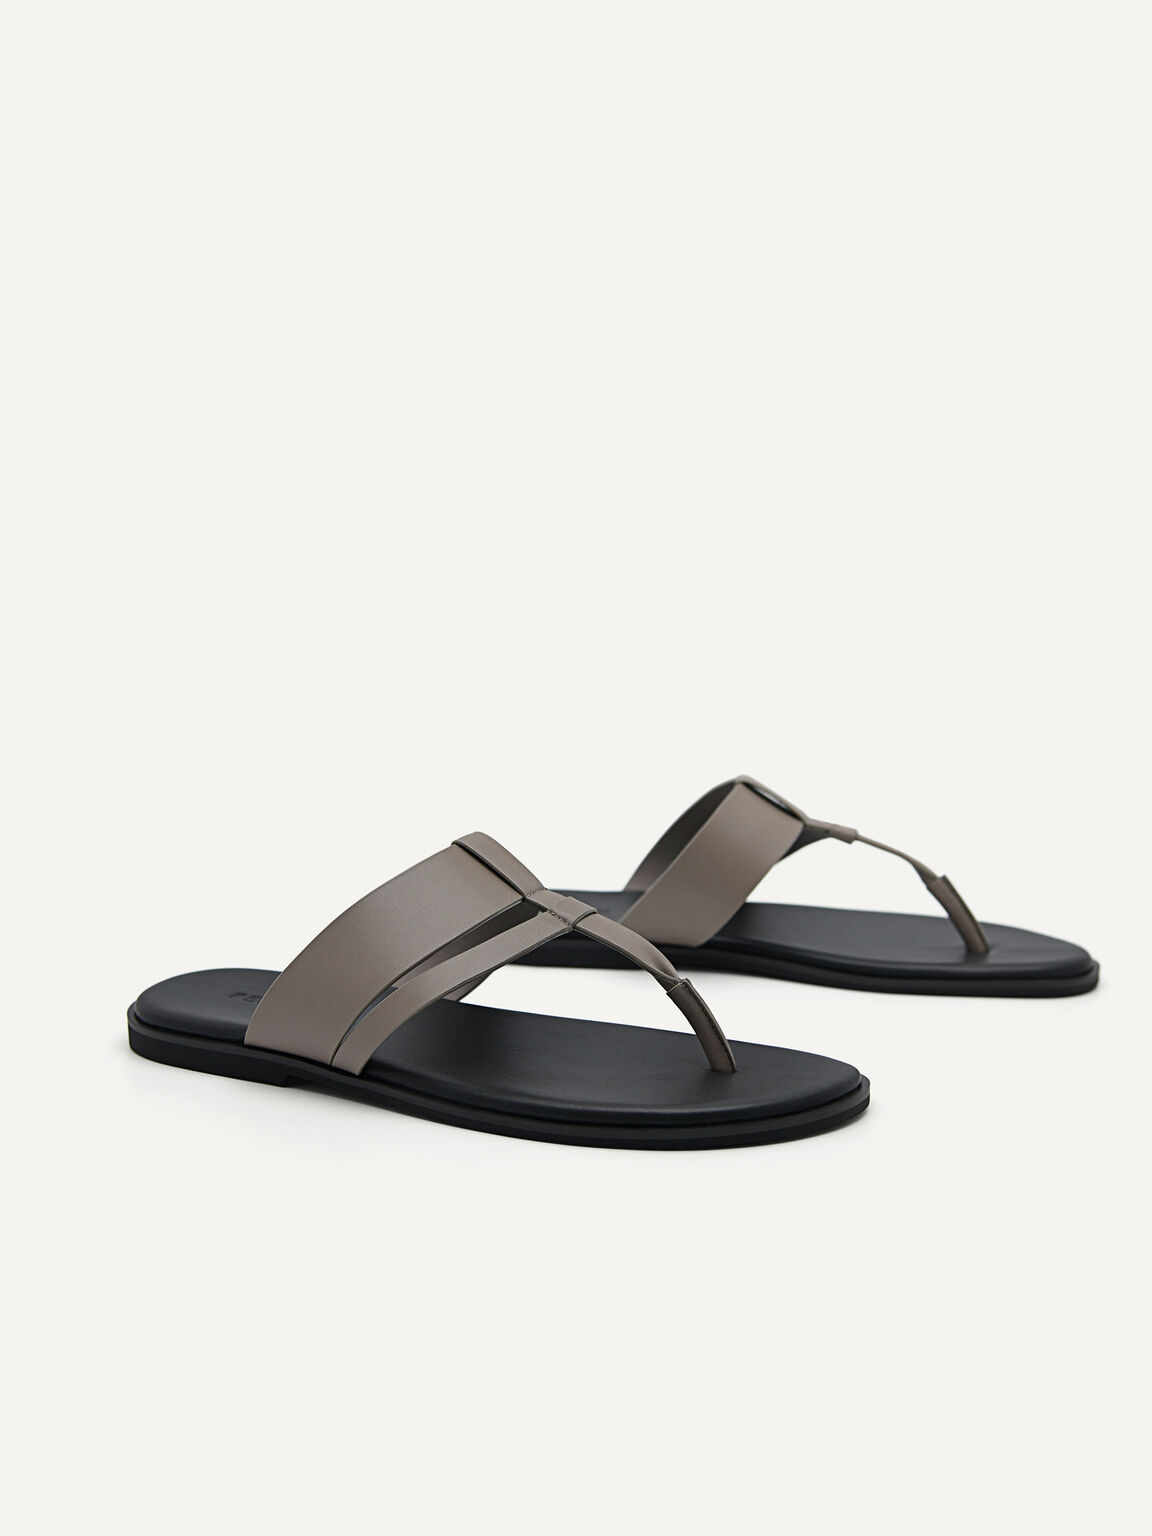 Grid Thong Sandals, Taupe